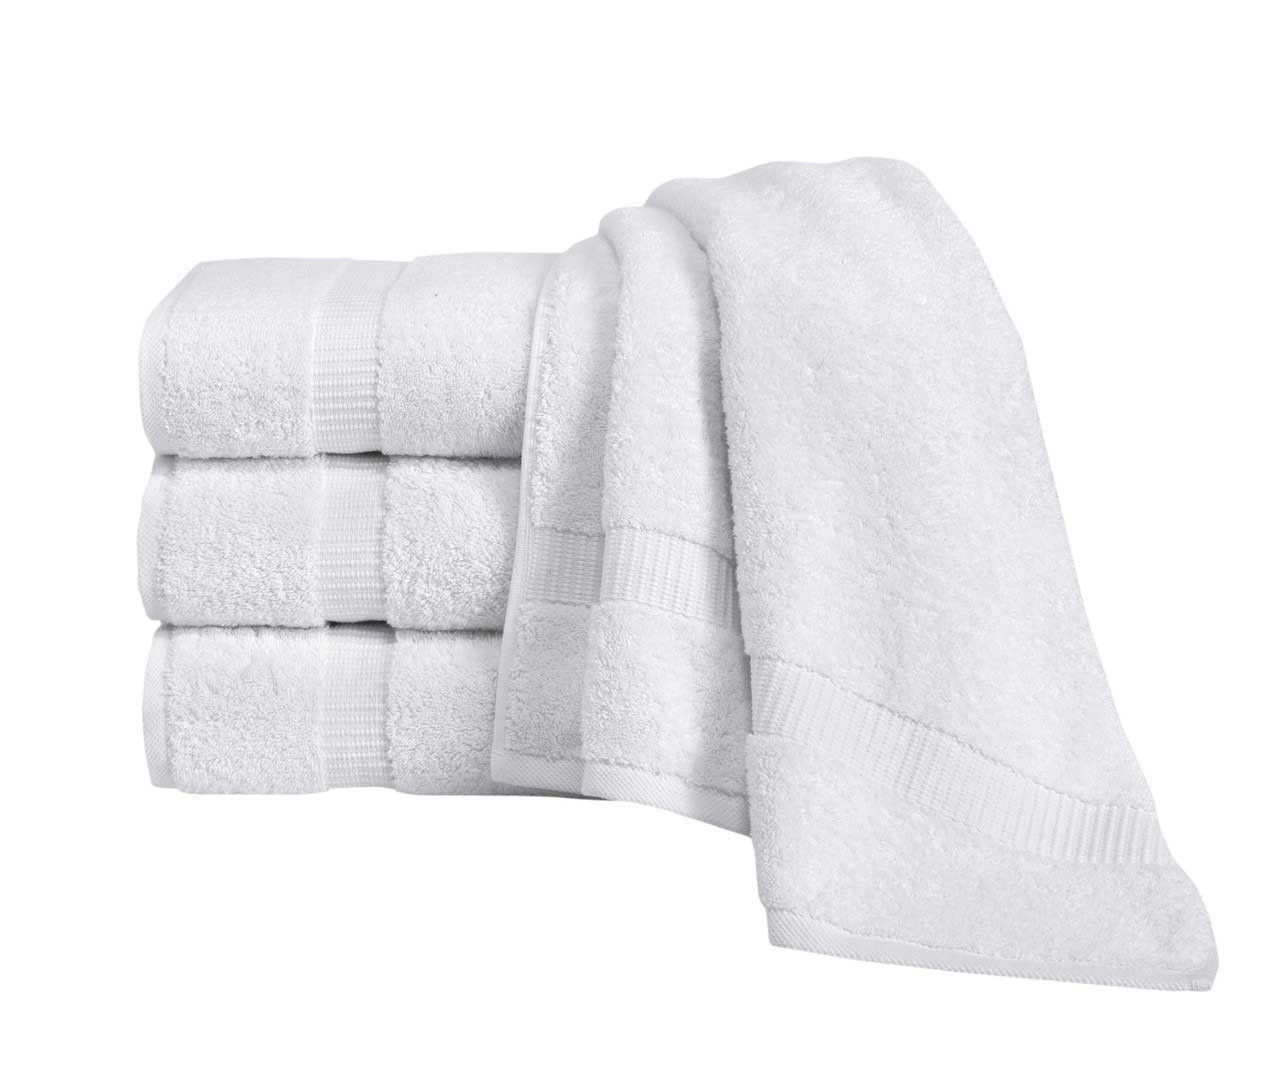 What makes the Royal Turkish White Towels Villa Collection so special?